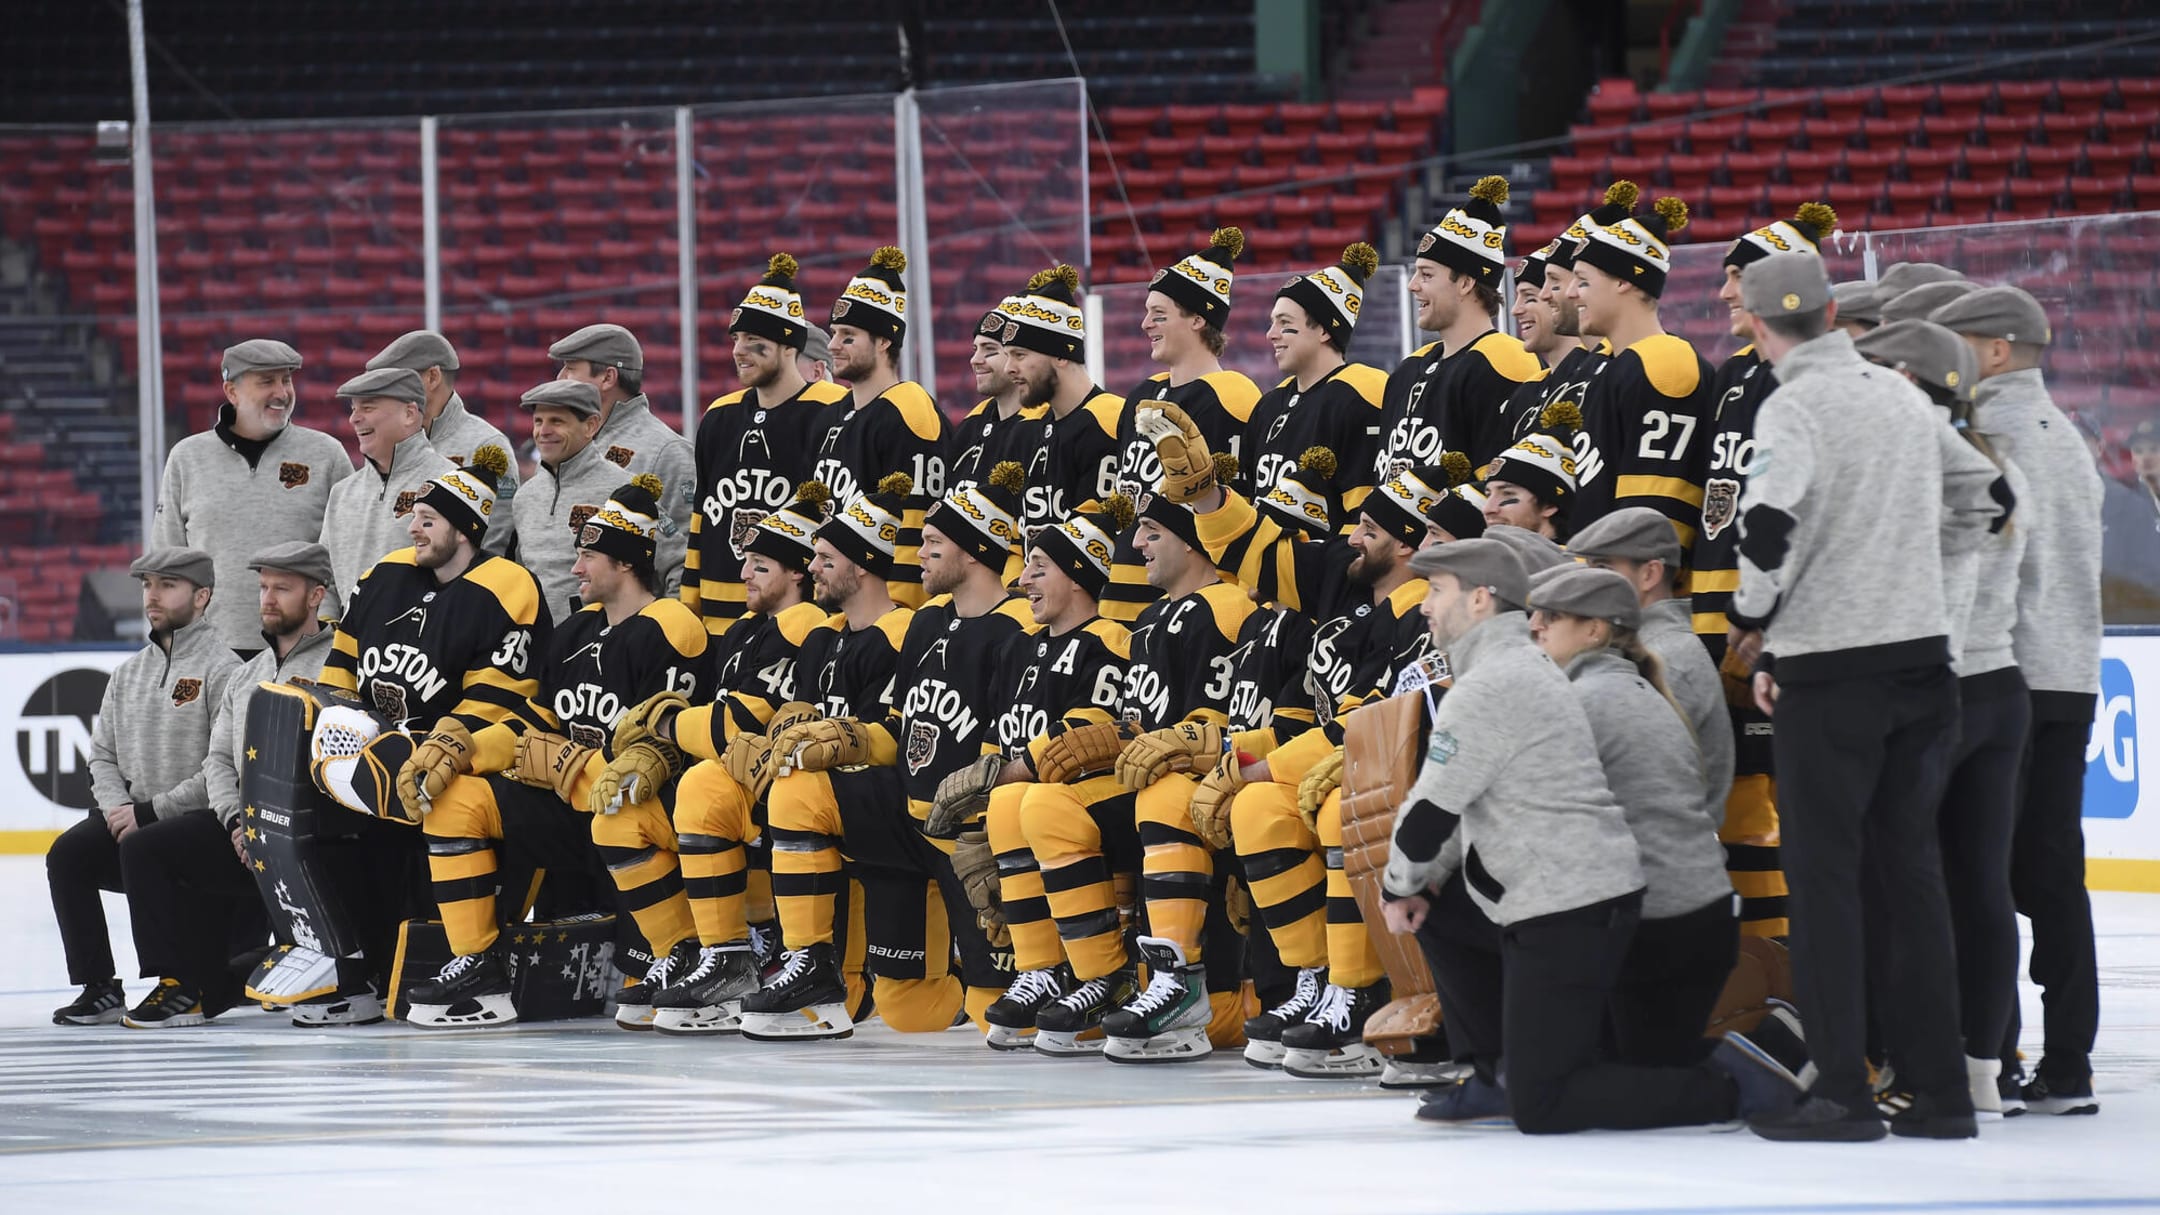 Boston Bruins rumored as visiting team for 2019 NHL Winter Classic